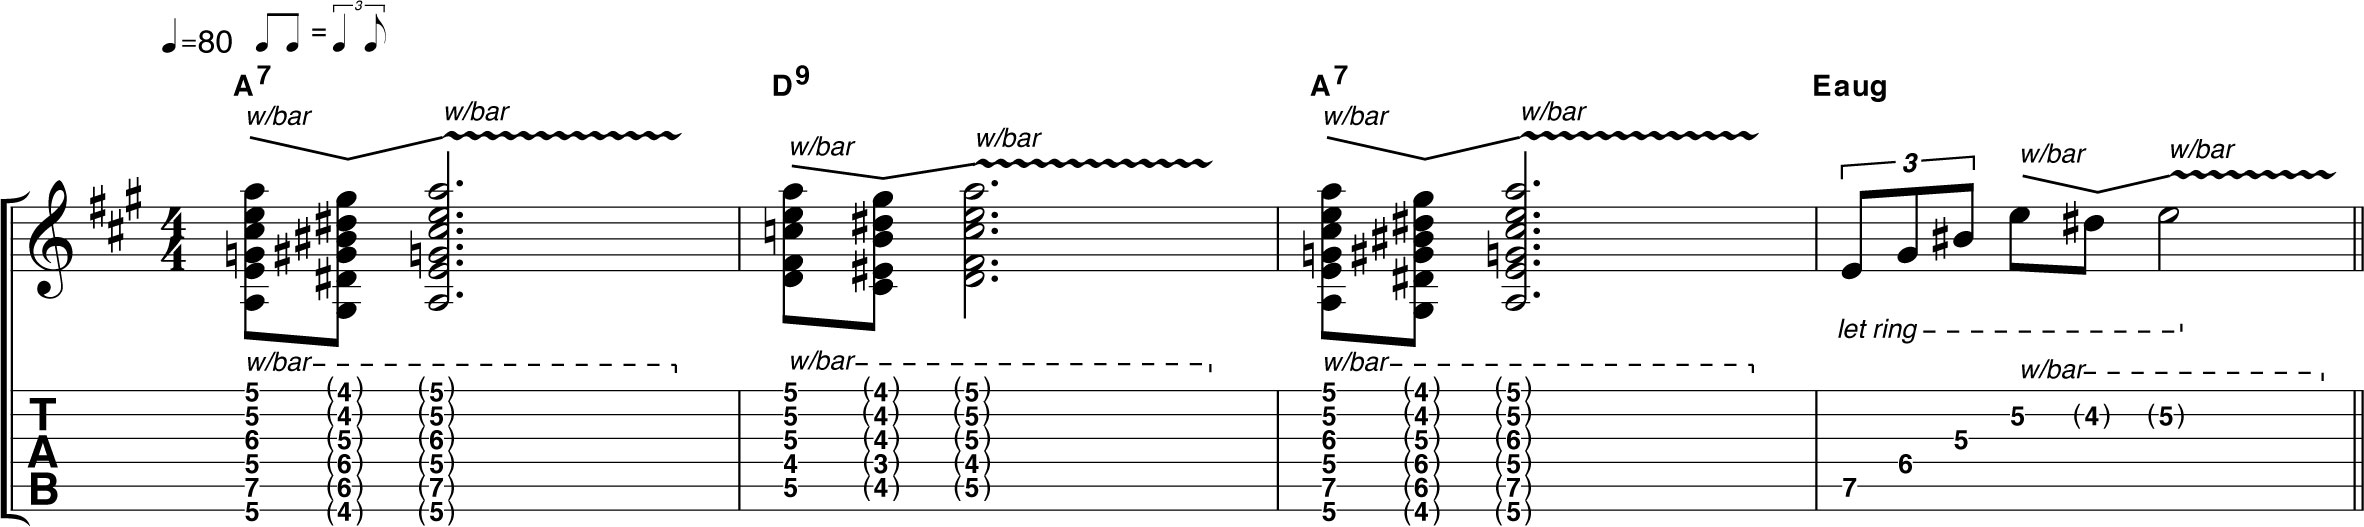 play-with-a-vibrato-fig1